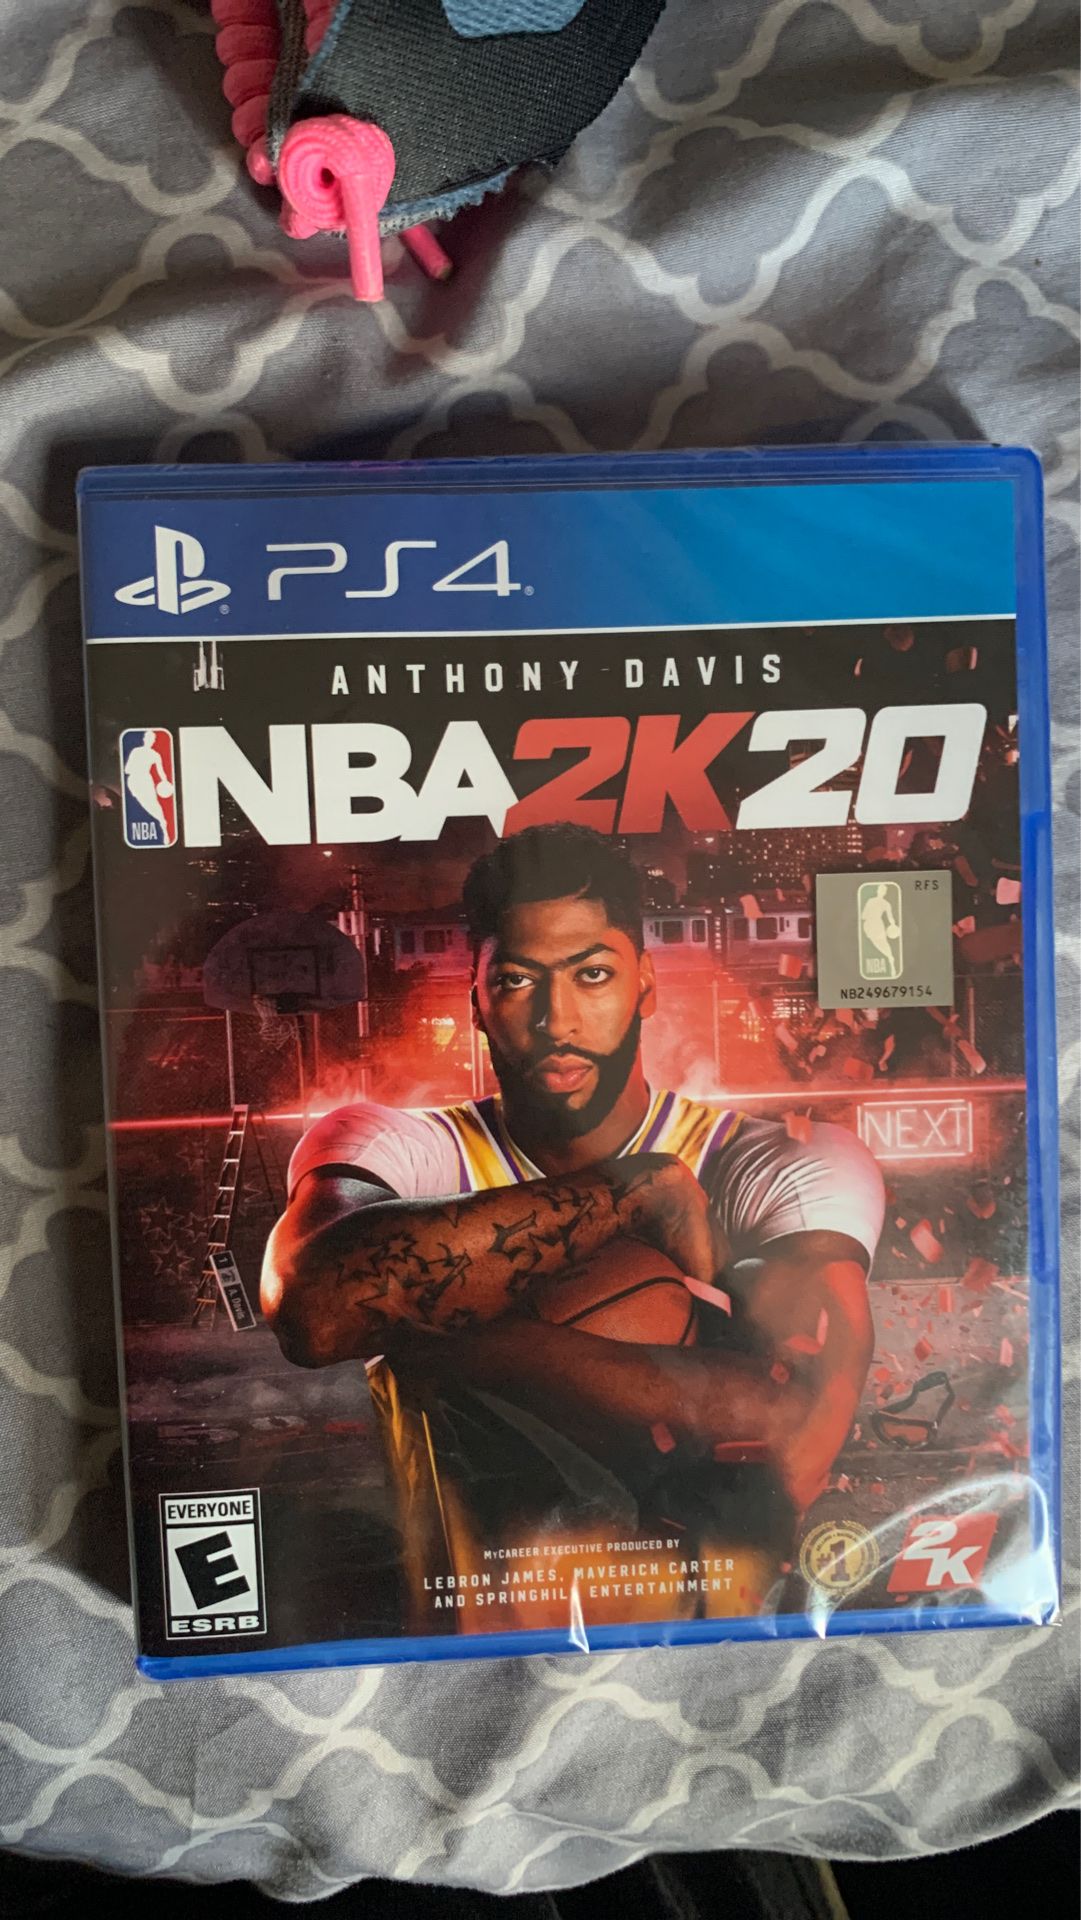 NBA 2k 20 for PS4